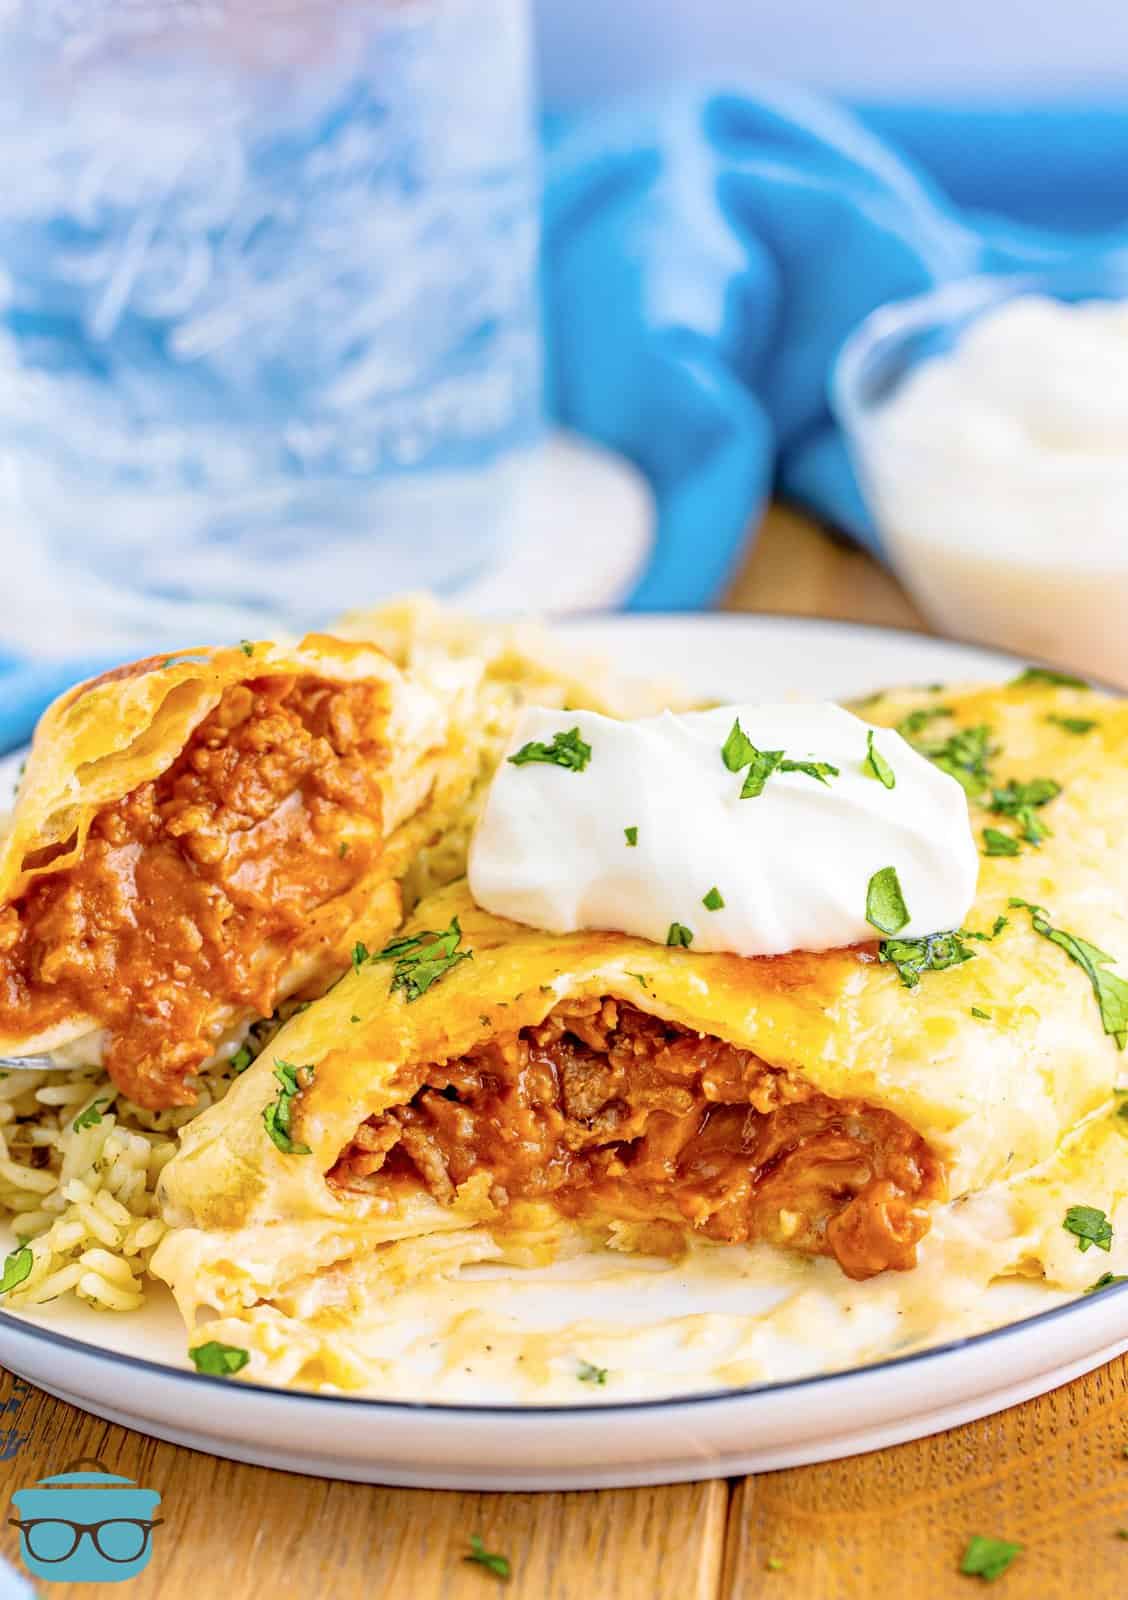 One of the Smothered Beef Burritos on white plate cut open showing the filling inside, topped with sour cream.